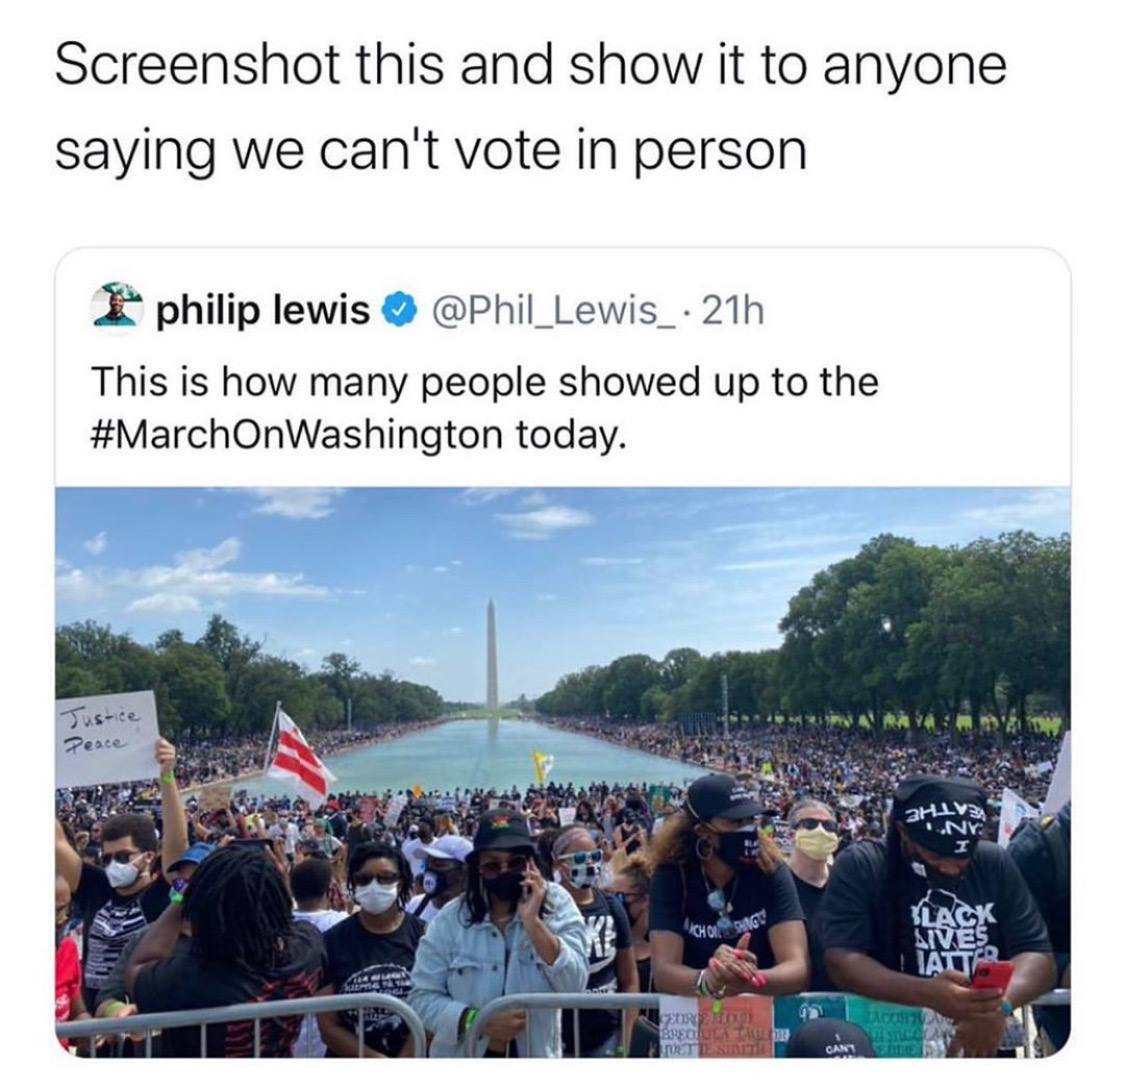 crowd - Screenshot this and show it to anyone saying we can't vote in person philip lewis 21h This is how many people showed up to the today. Justice Peace ... Ny I Chi Things Ilack Stves Iatt ume 3 Sic Brellada Til Site Cant